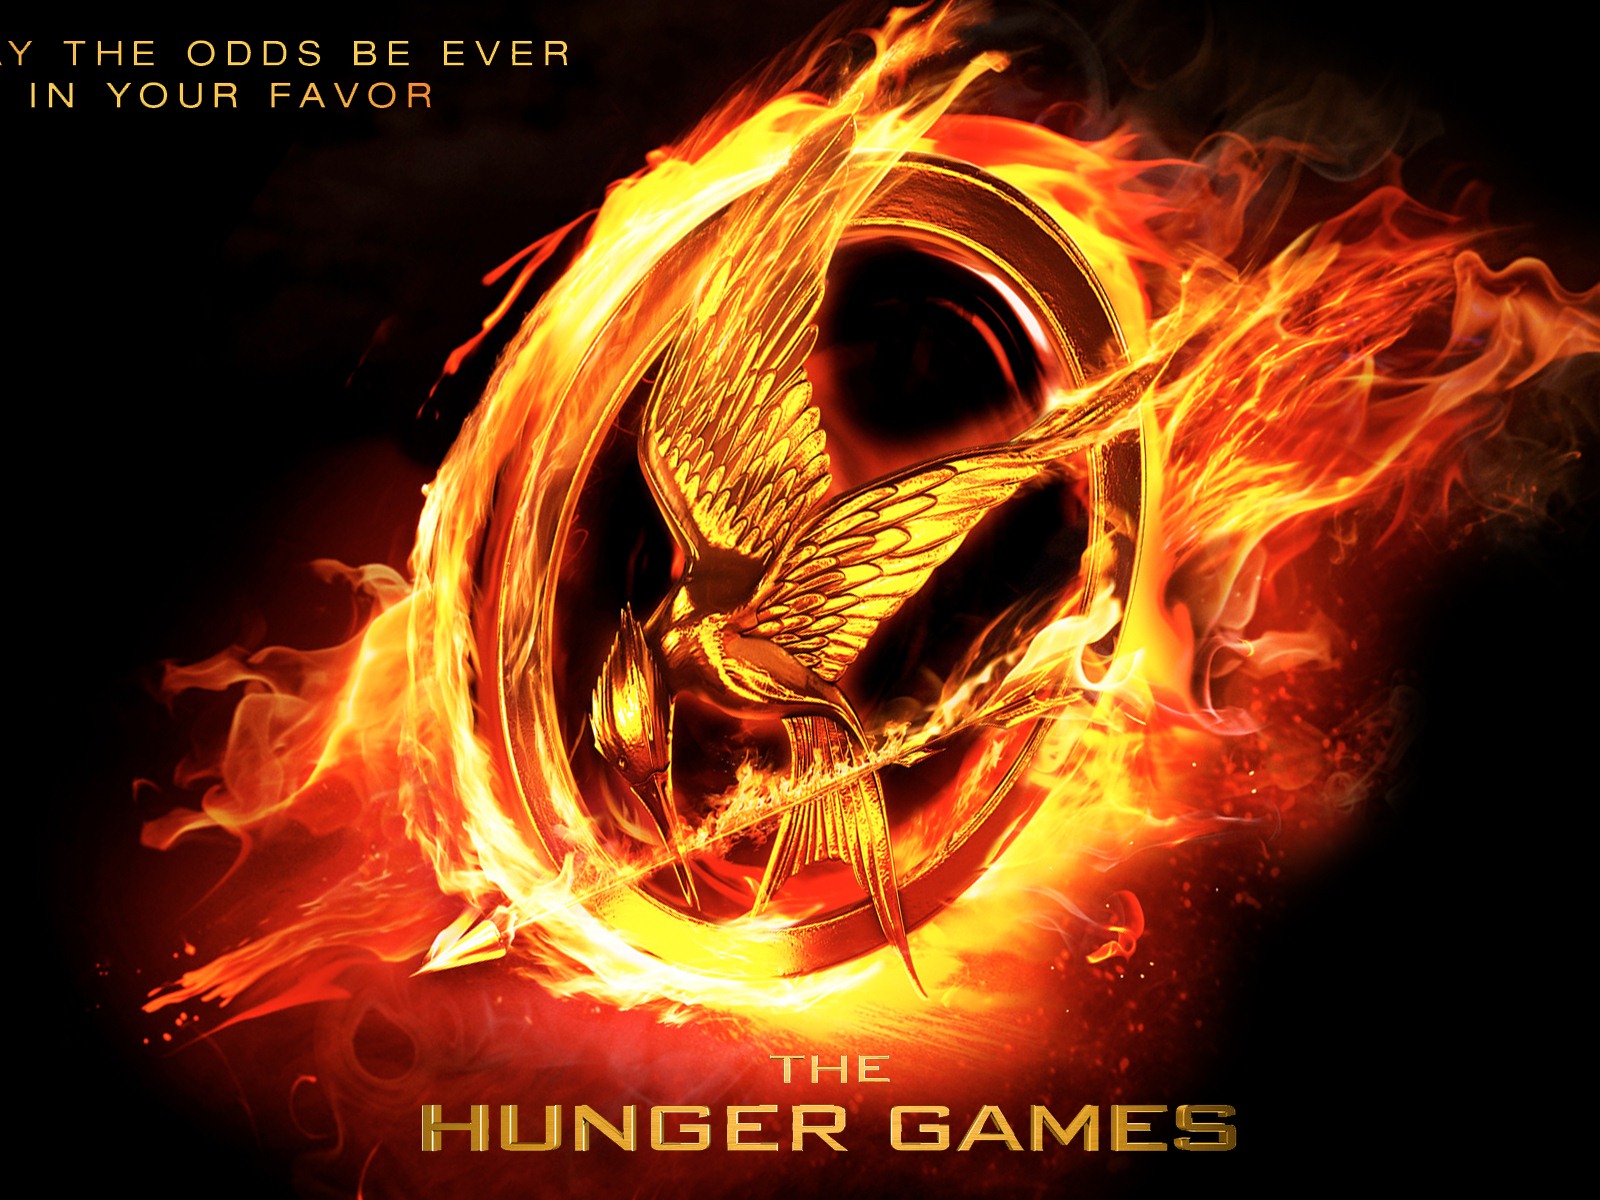 The Hunger Games HD wallpapers #13 - 1600x1200